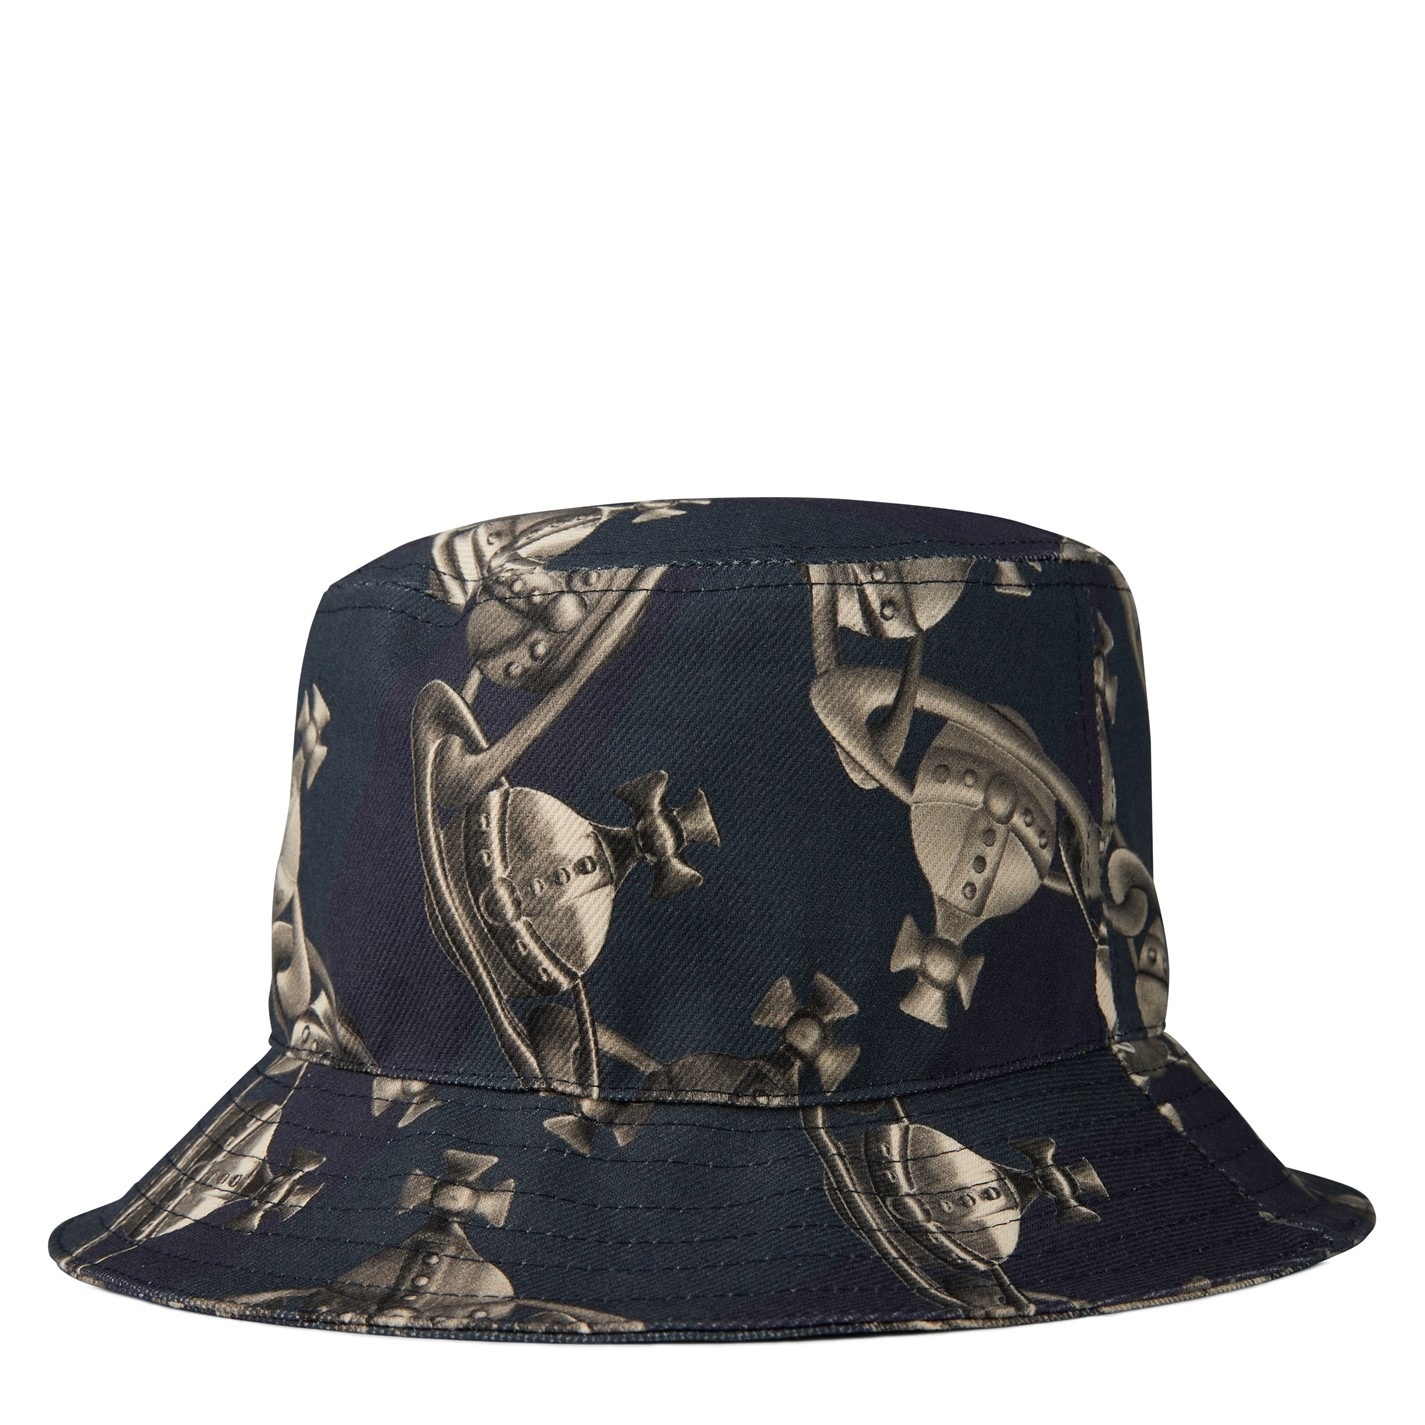 ALL-OVER ORB PRINT BUCKET HAT - 2